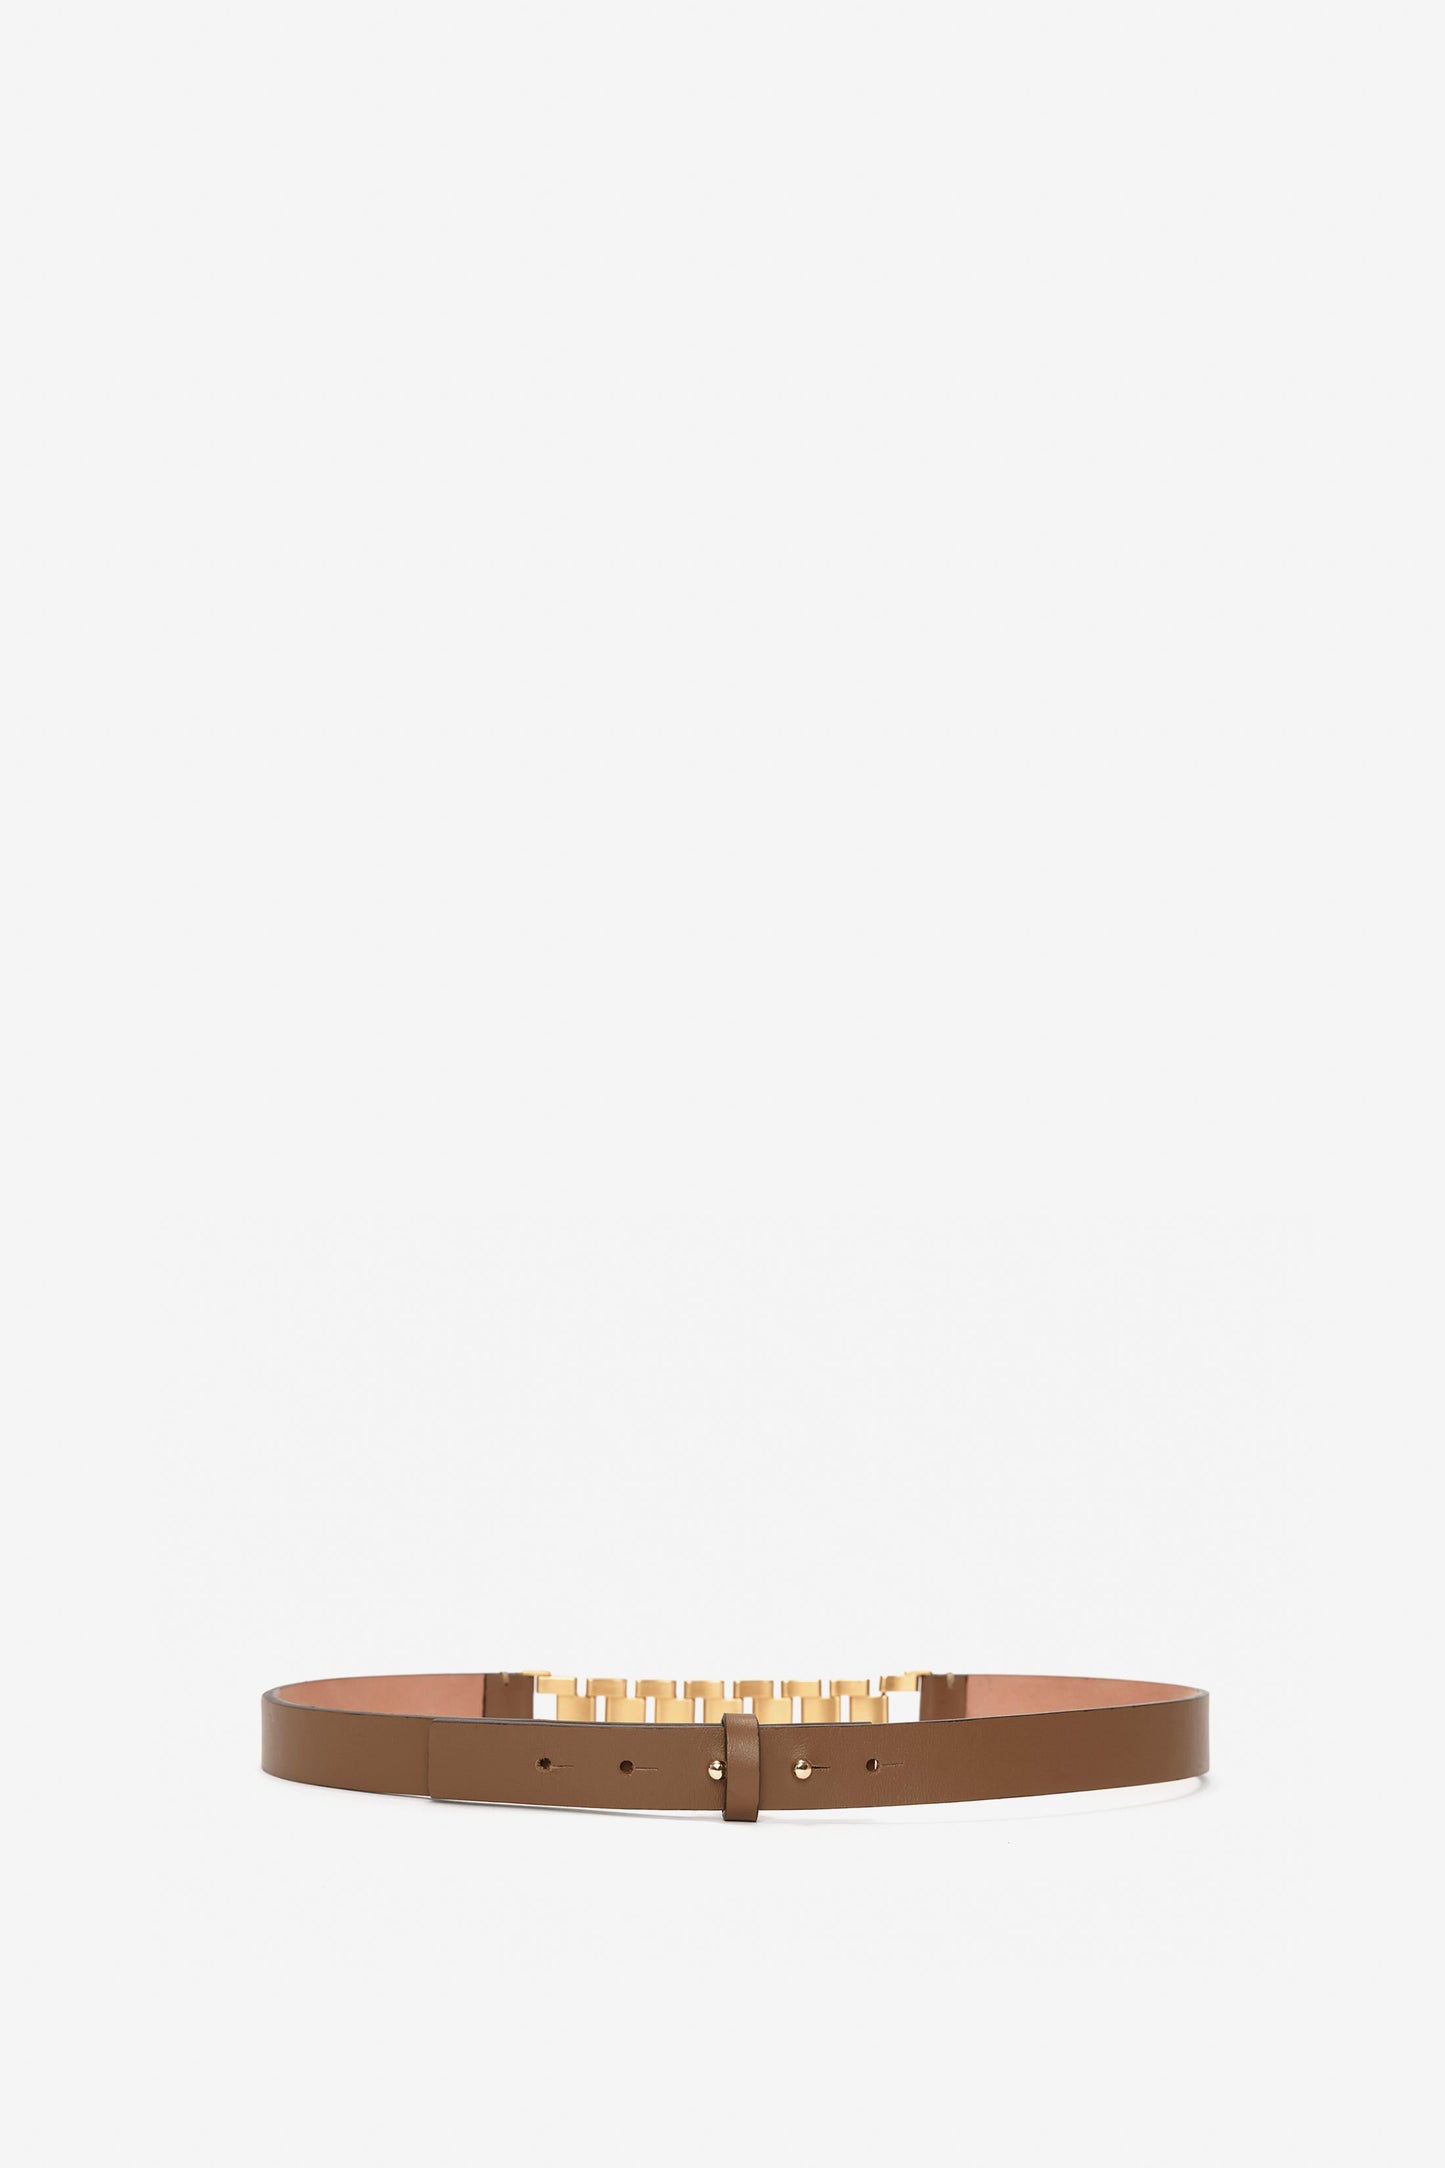 A slim Victoria Beckham khaki-brown calf-leather belt with a golden square buckle, positioned horizontally on a white background.